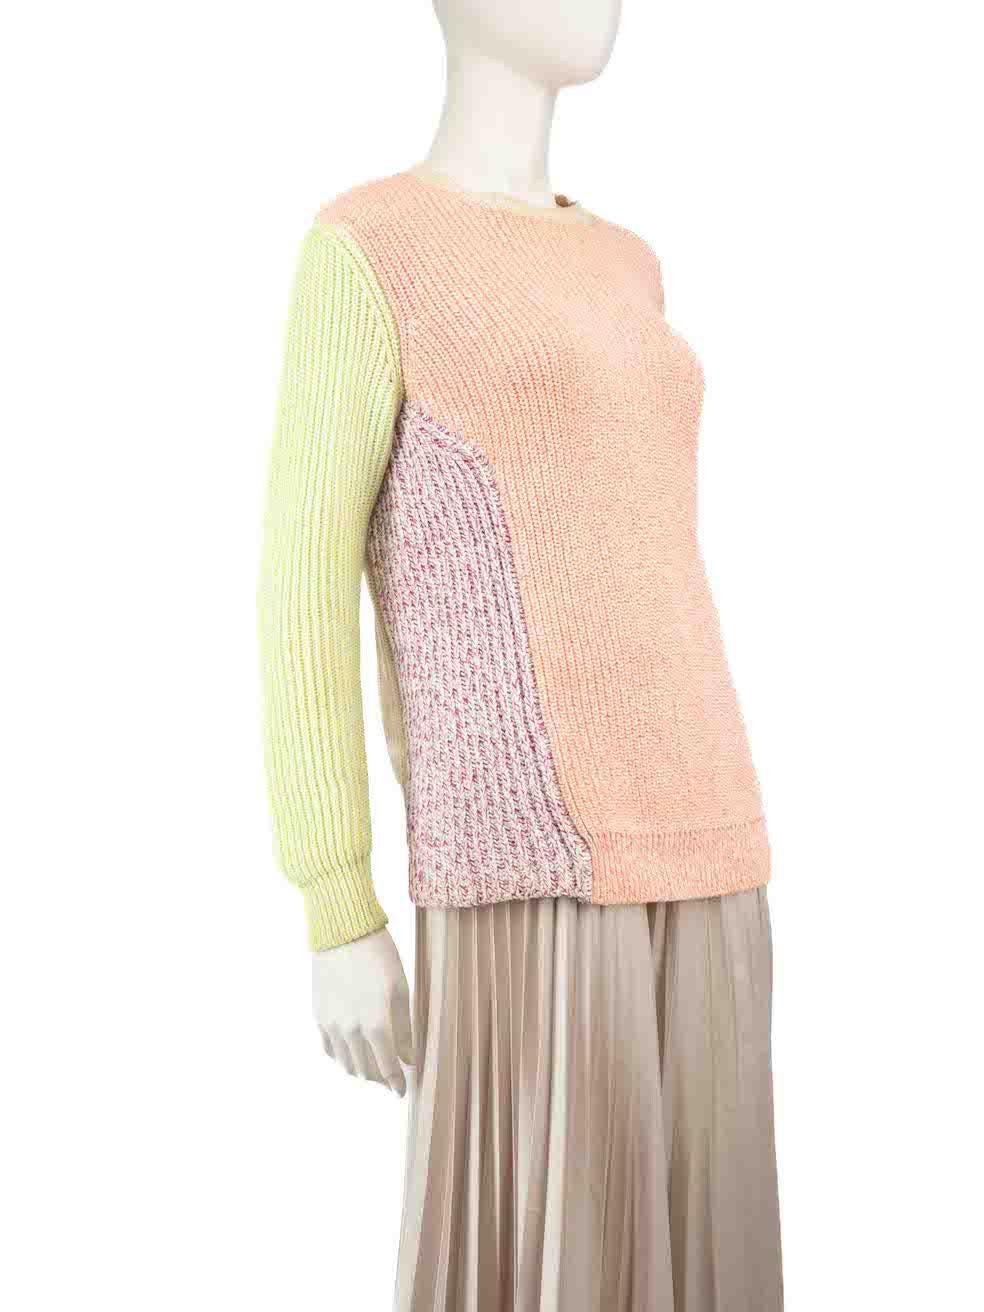 CONDITION is Very good. Minimal wear to knit is evident. Minimal wear to back with a pluck to the weave. Small mark on the left sleeve is seen on this used Stella McCartney designer resale item.
 
 
 
 Details
 
 
 Multicolour -Neon tone
 
 Cotton
